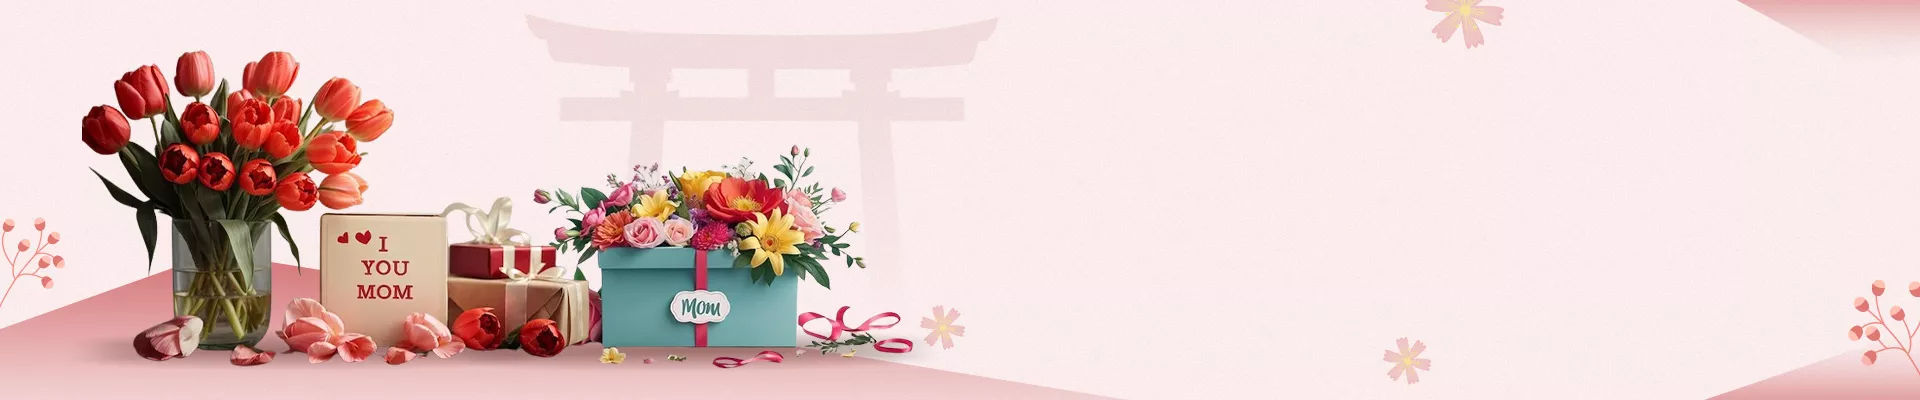 Send Mother's Day Gifts to Japan